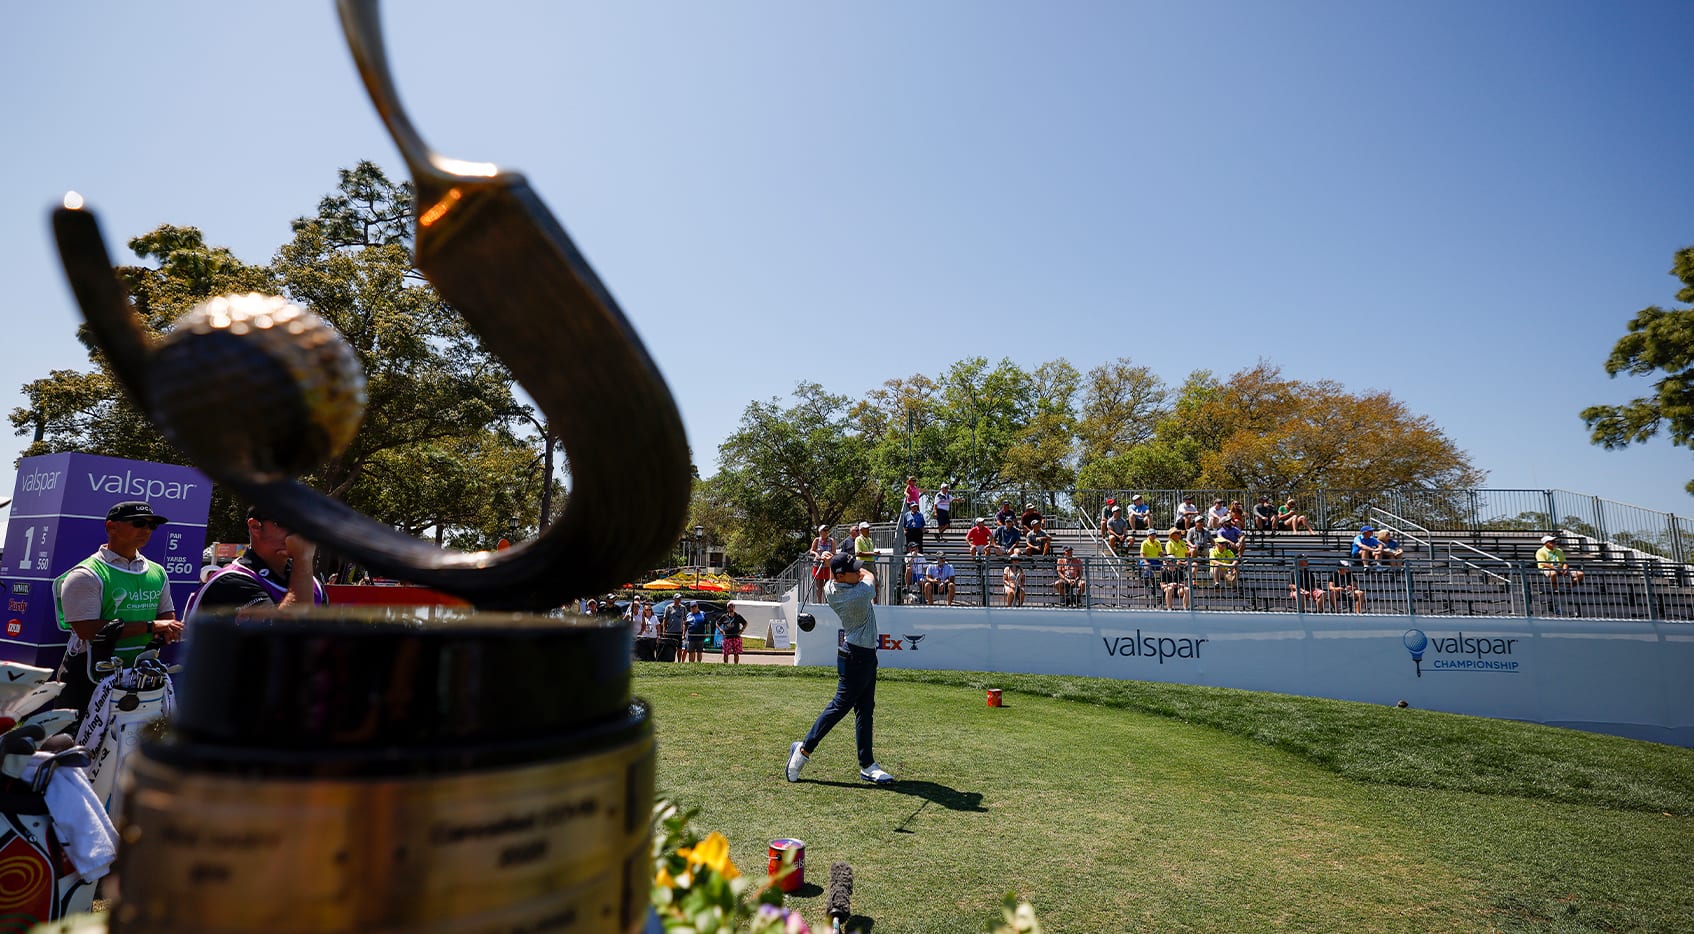 How to watch Valspar Championship, Round 4 Featured Groups, live scores, tee times, TV times